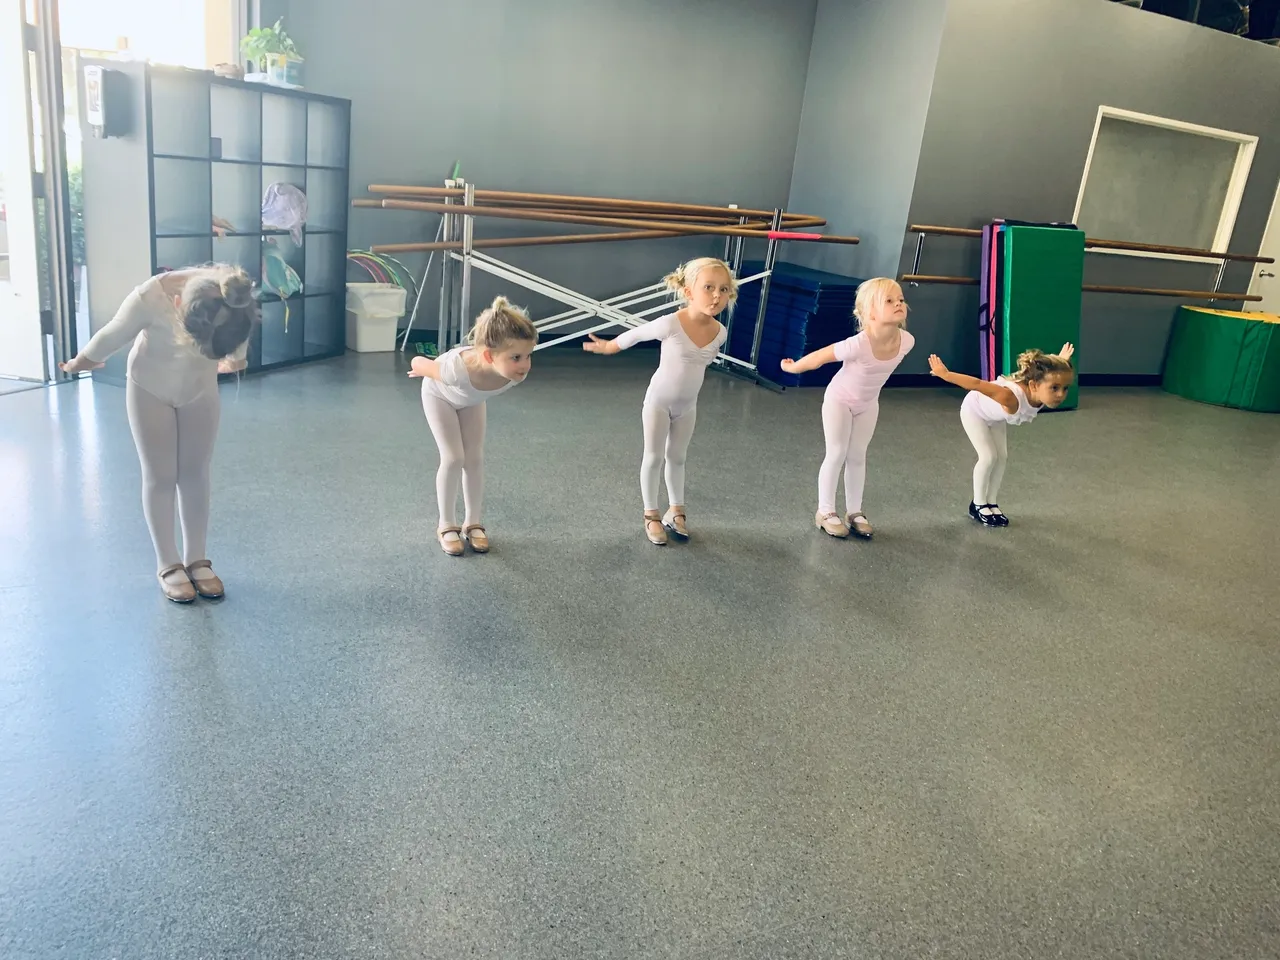 A group of young children in white outfits practicing.